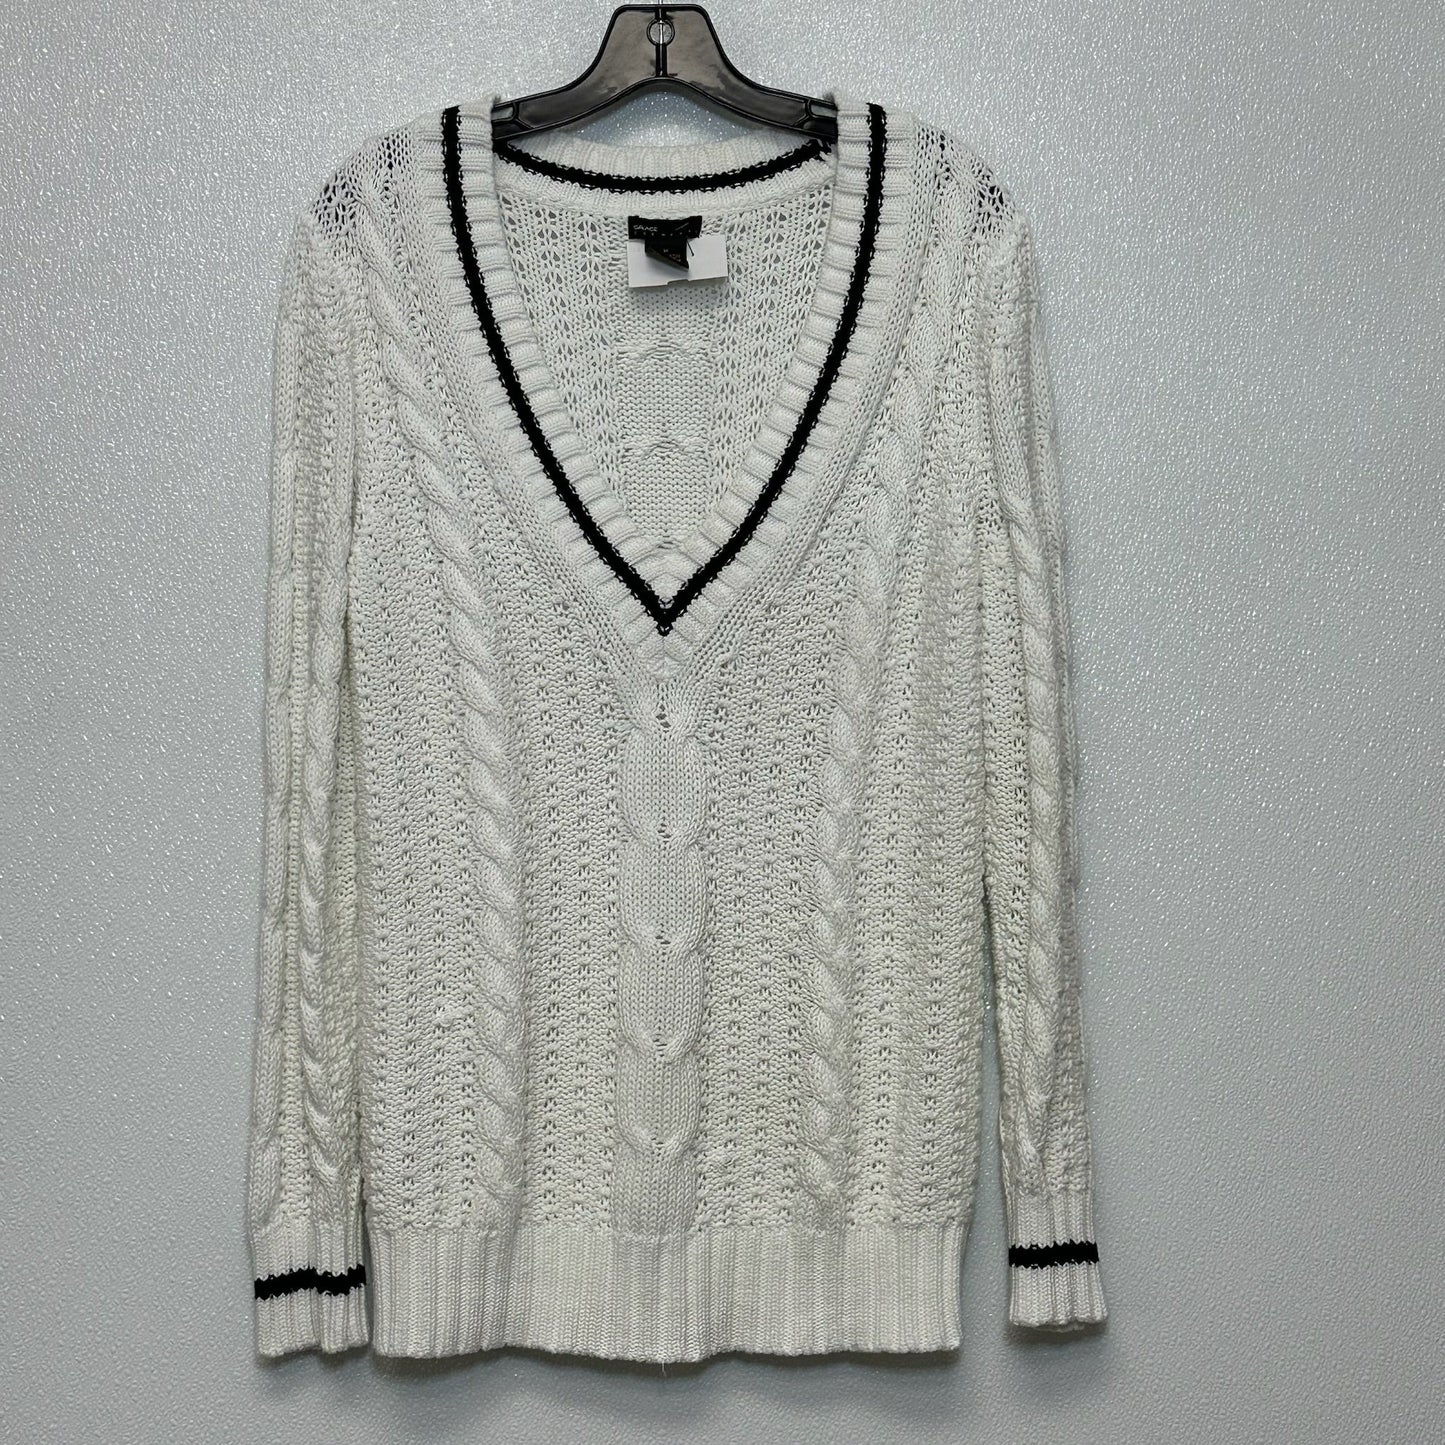 Sweater By Grace Elements  Size: M